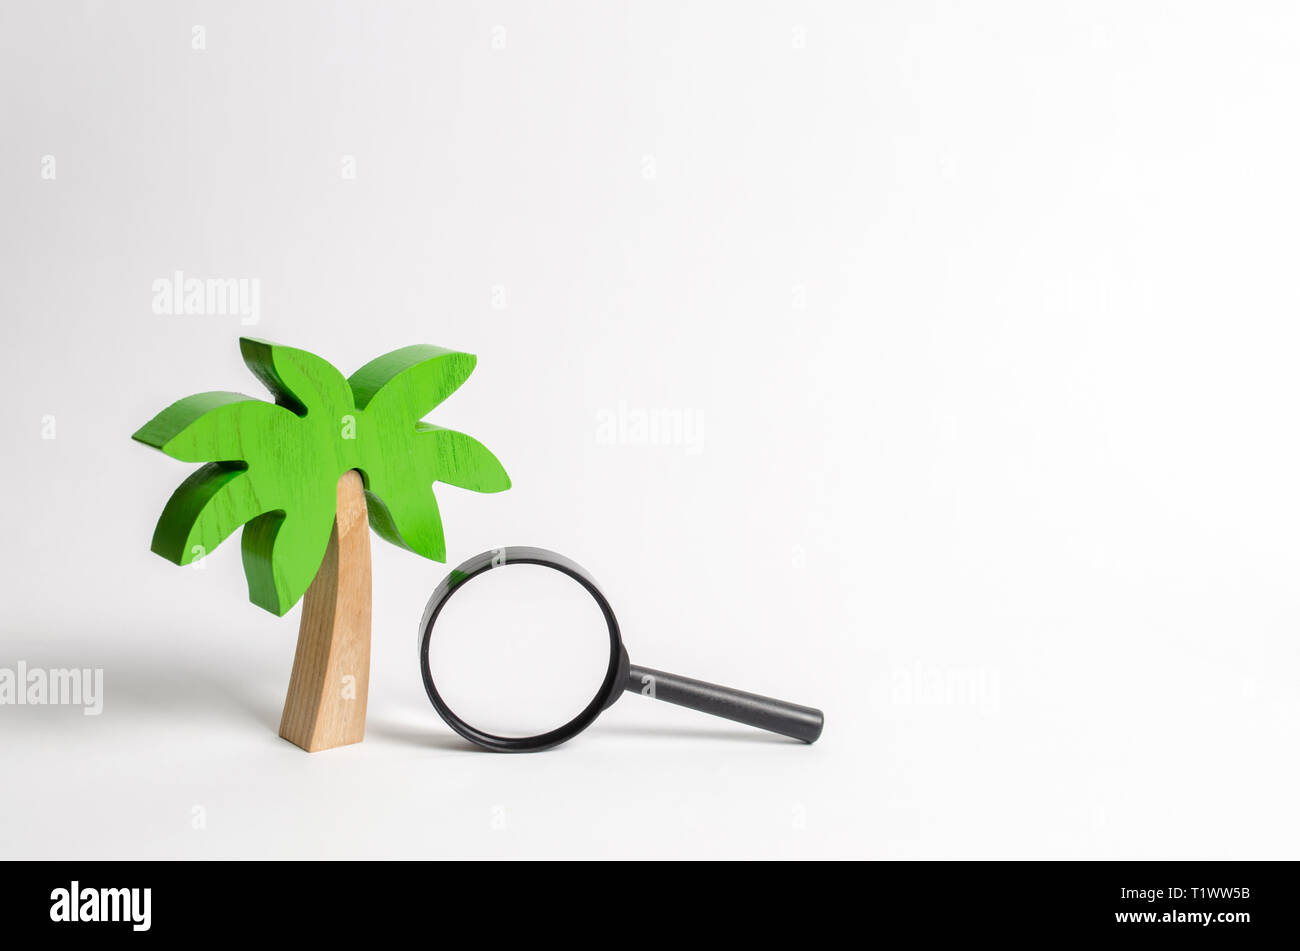 Wooden palm tree and a magnifying glass. Search for tours and cruises to warm countries. The development of tourism. Tropical island. Conceptual leisu Stock Photo